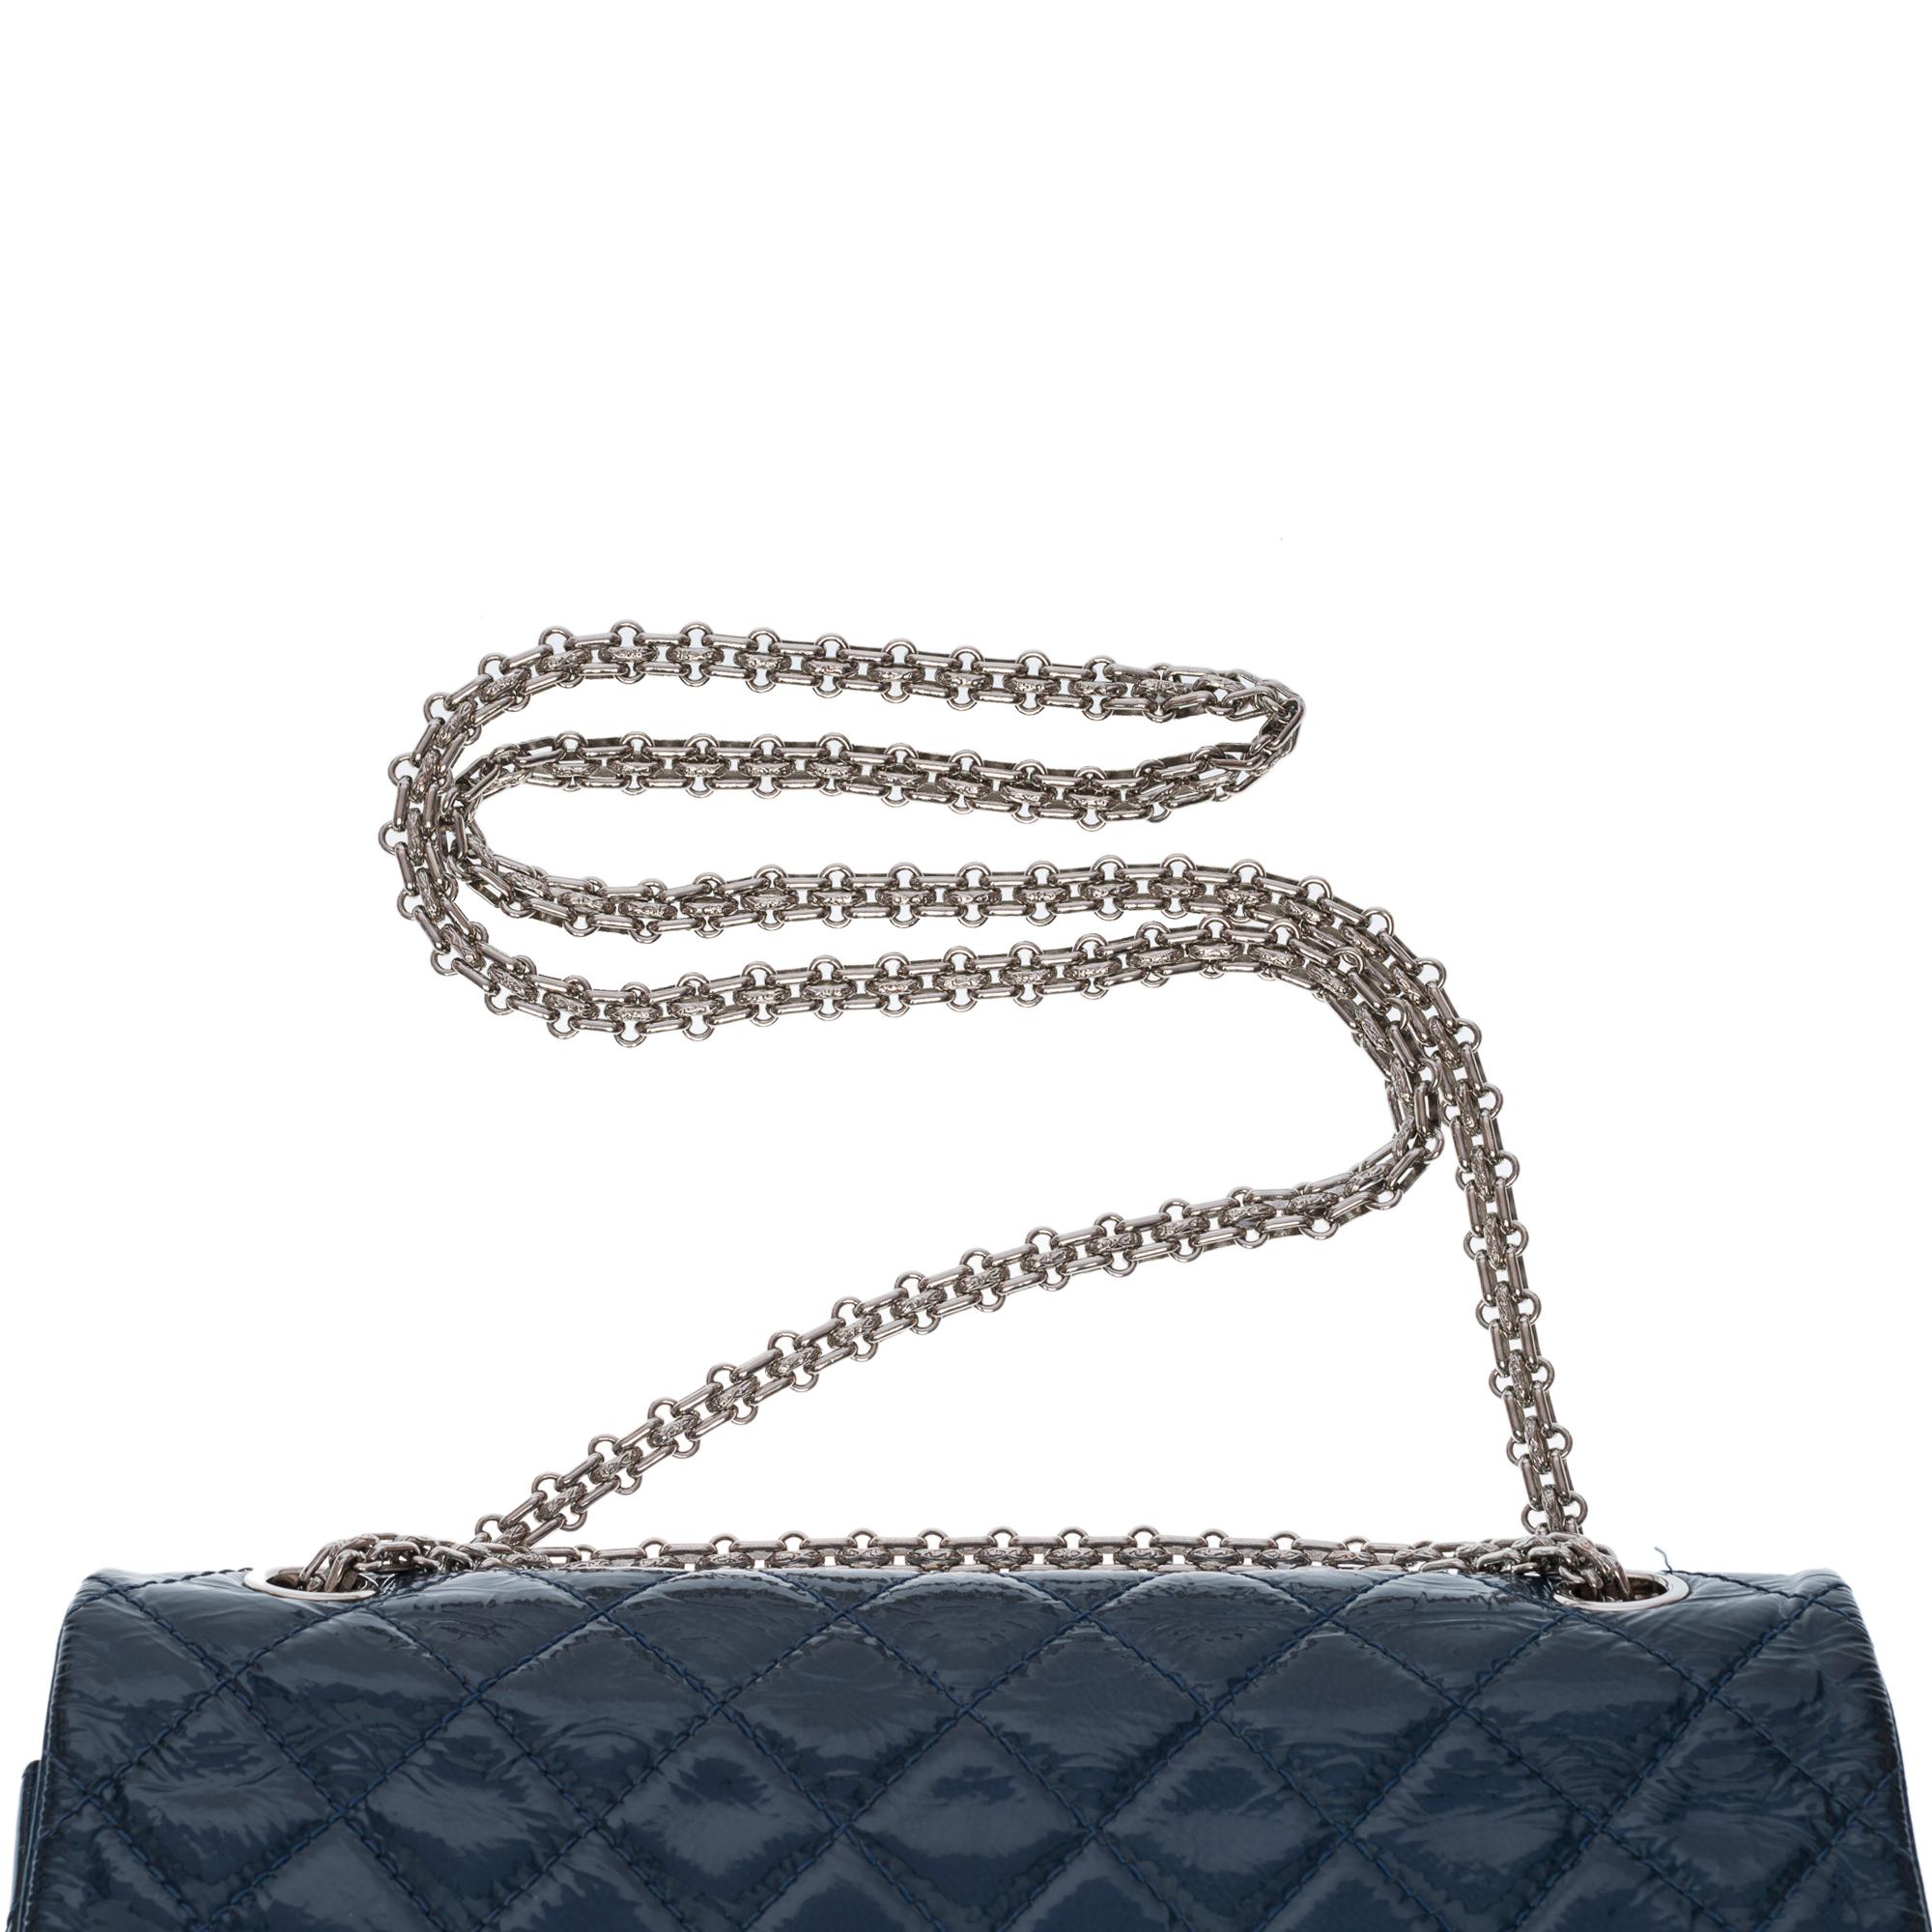 Women's Chanel Classic 2.55 double flap shoulder bag in blue quilted patent leather, SHW